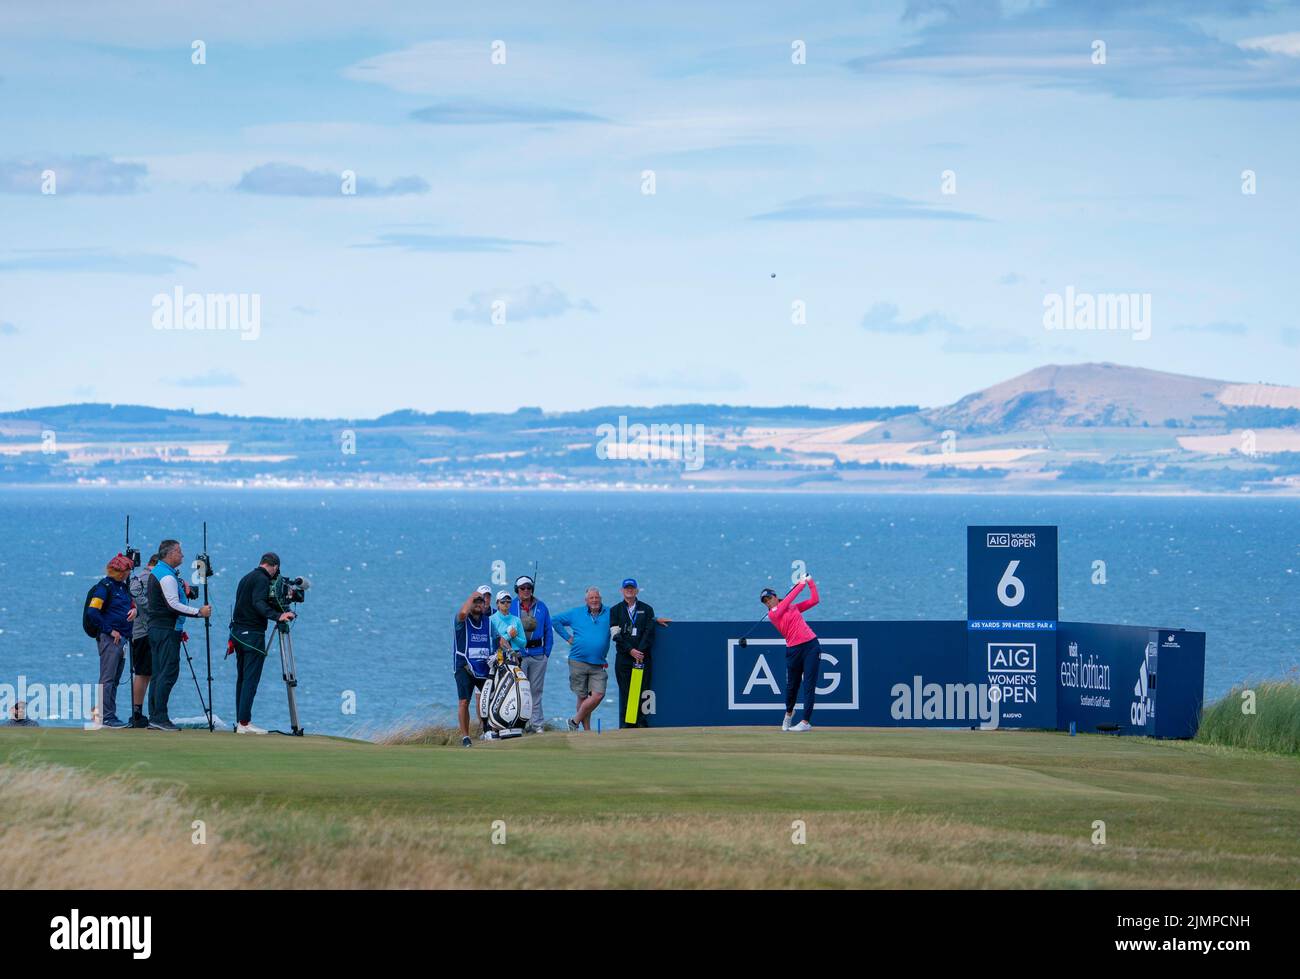 Gullane, Scotland, UK. 7th August 2022. Final  round of the AIG Women’s Open golf championship at Muirfield in East Lothian. Pic;  Georgia Hall tees off on the Sixth hole. Iain Masterton/Alamy Live News Stock Photo